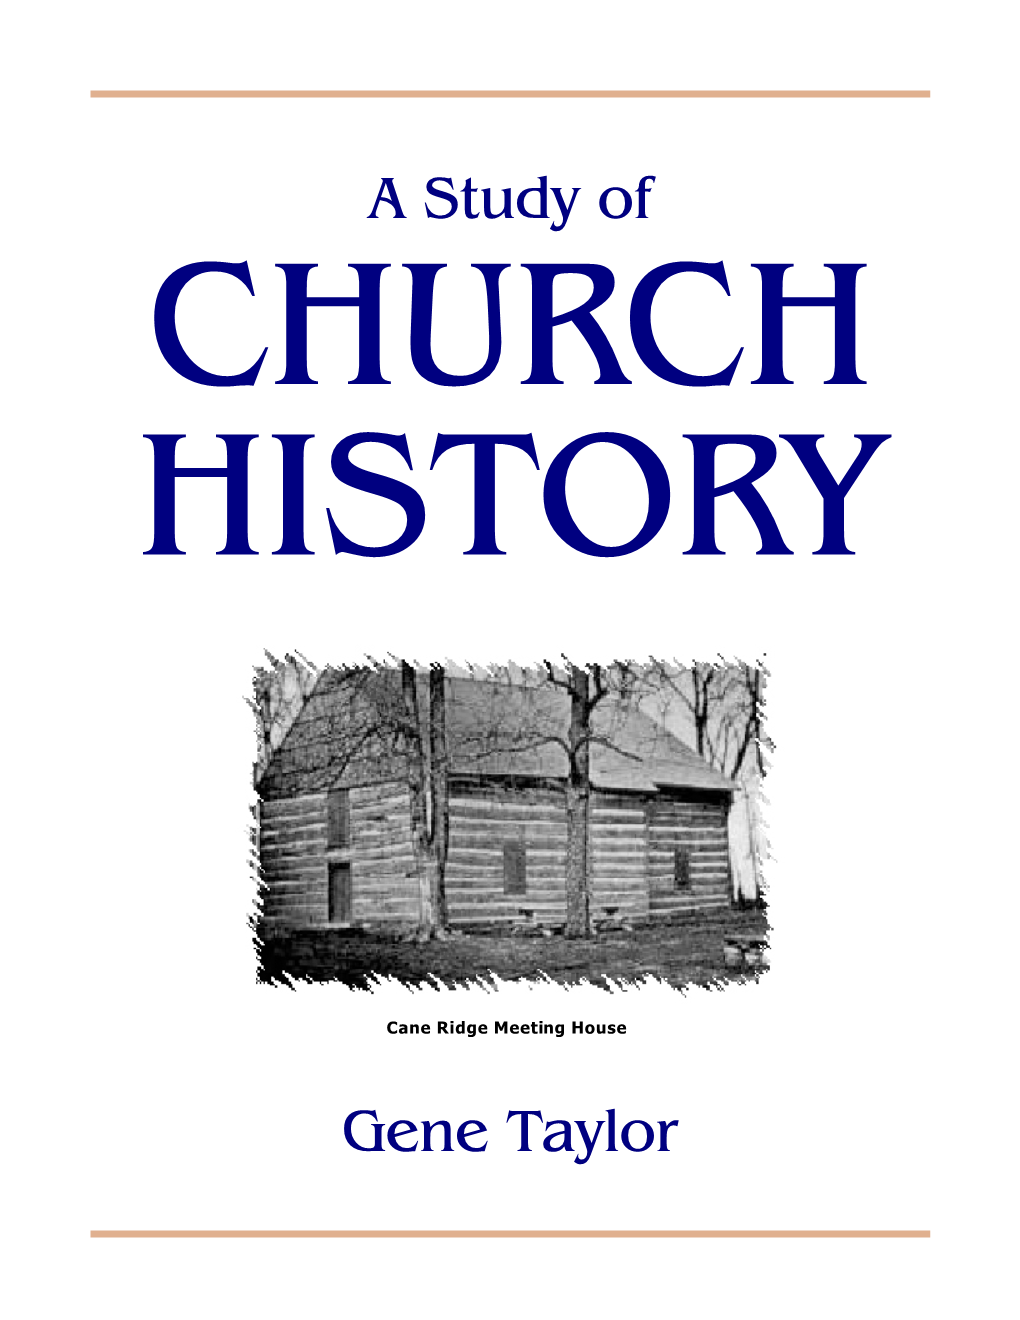 A Study in Church History Gene Taylor -1- Table of Contents